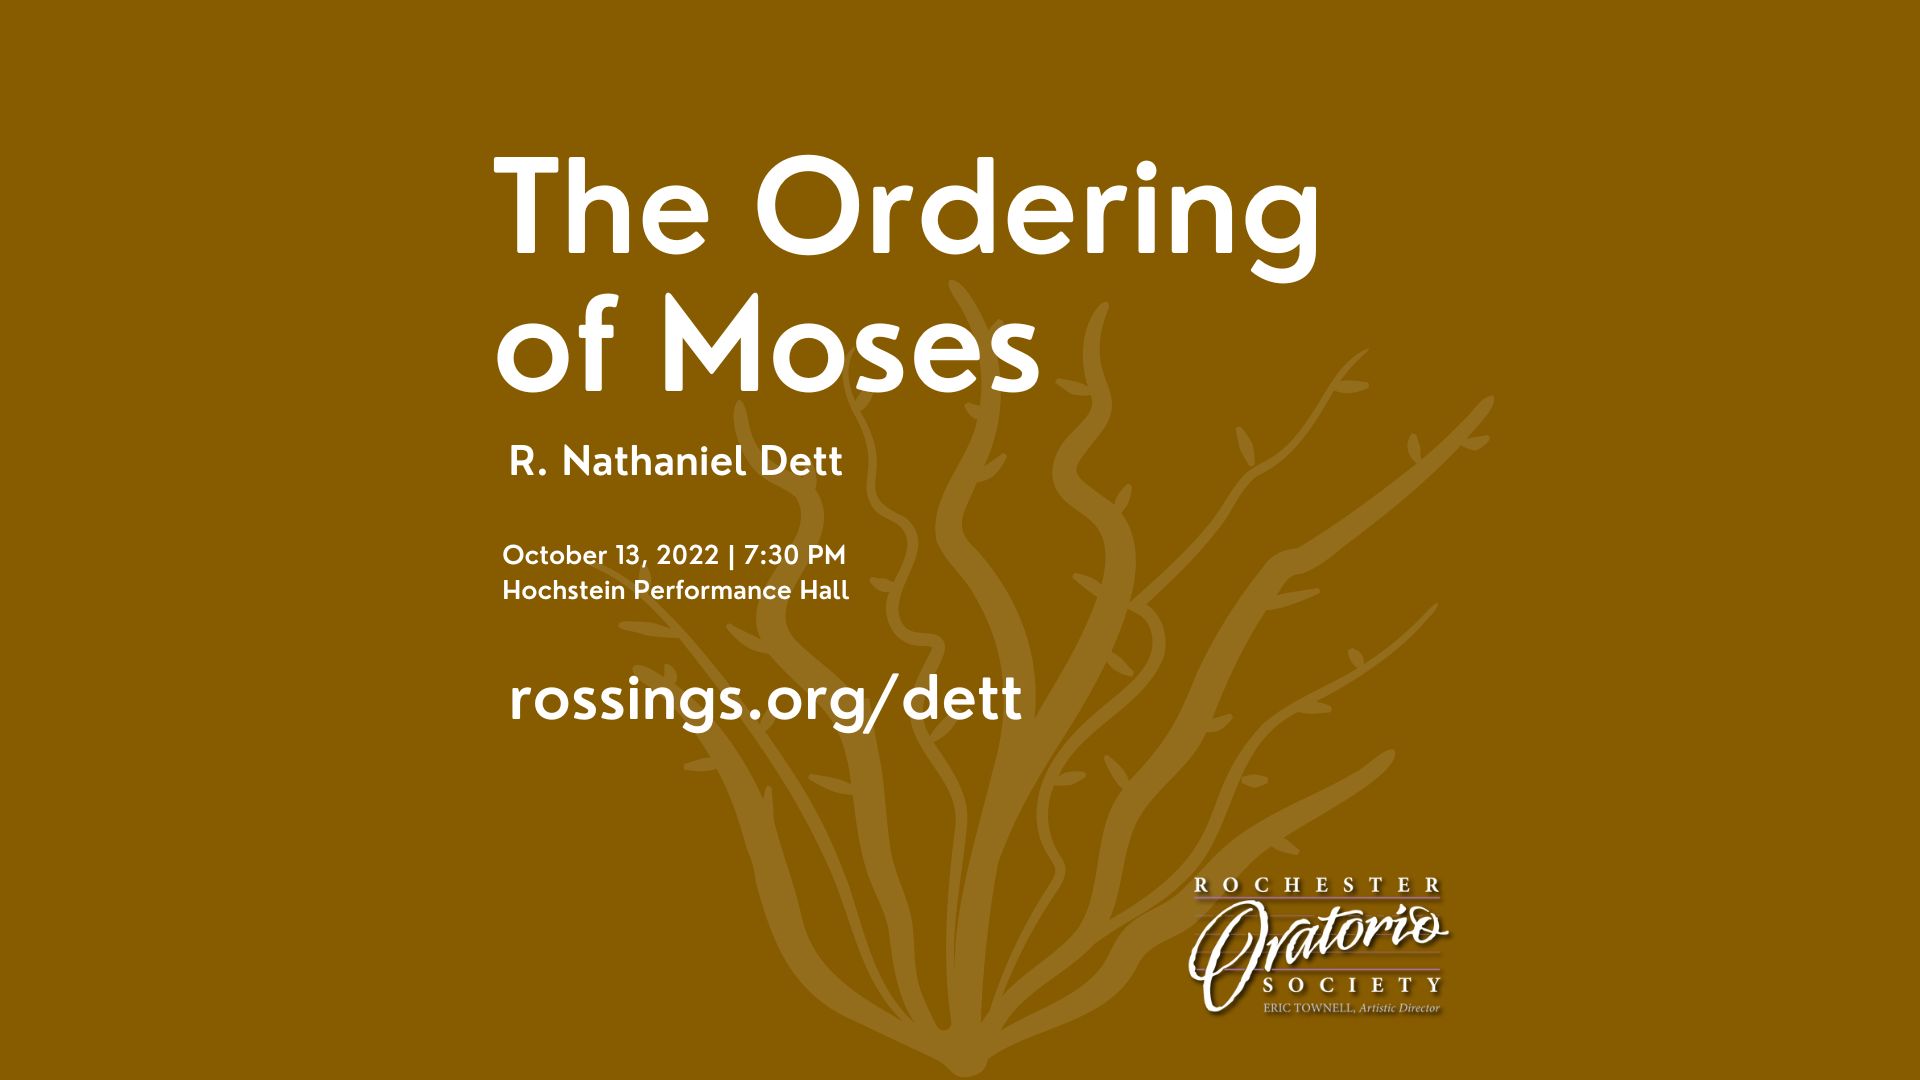 The Ordering of Moses, Rochester, New York, United States